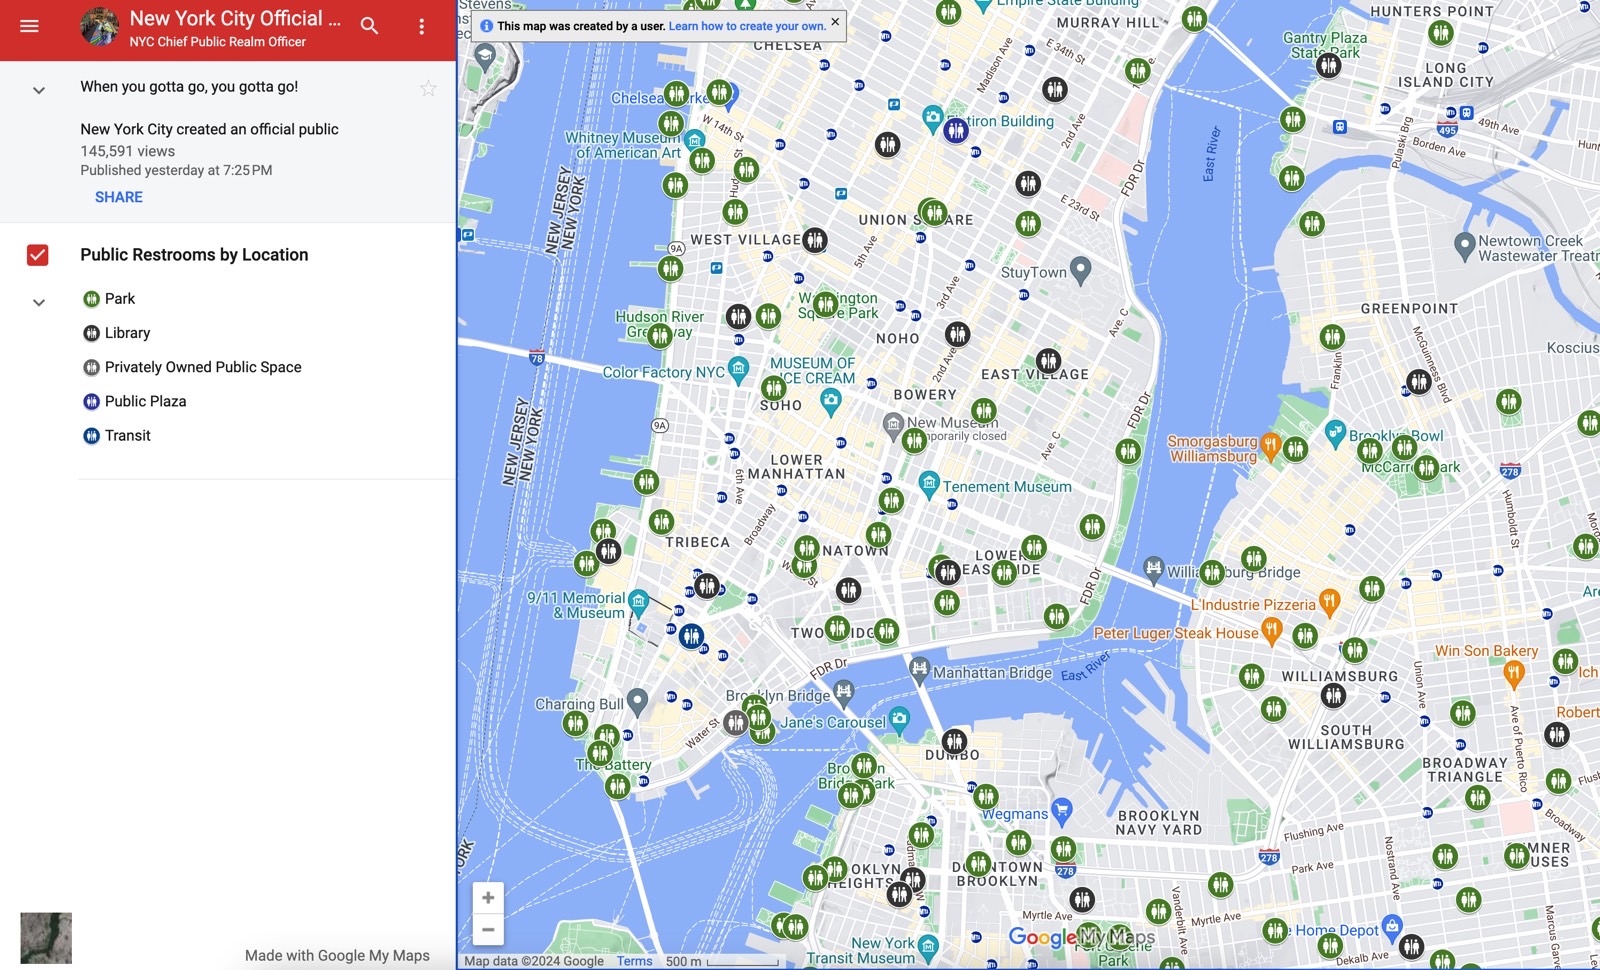 What you'll see in Google Maps when you load the custom map.